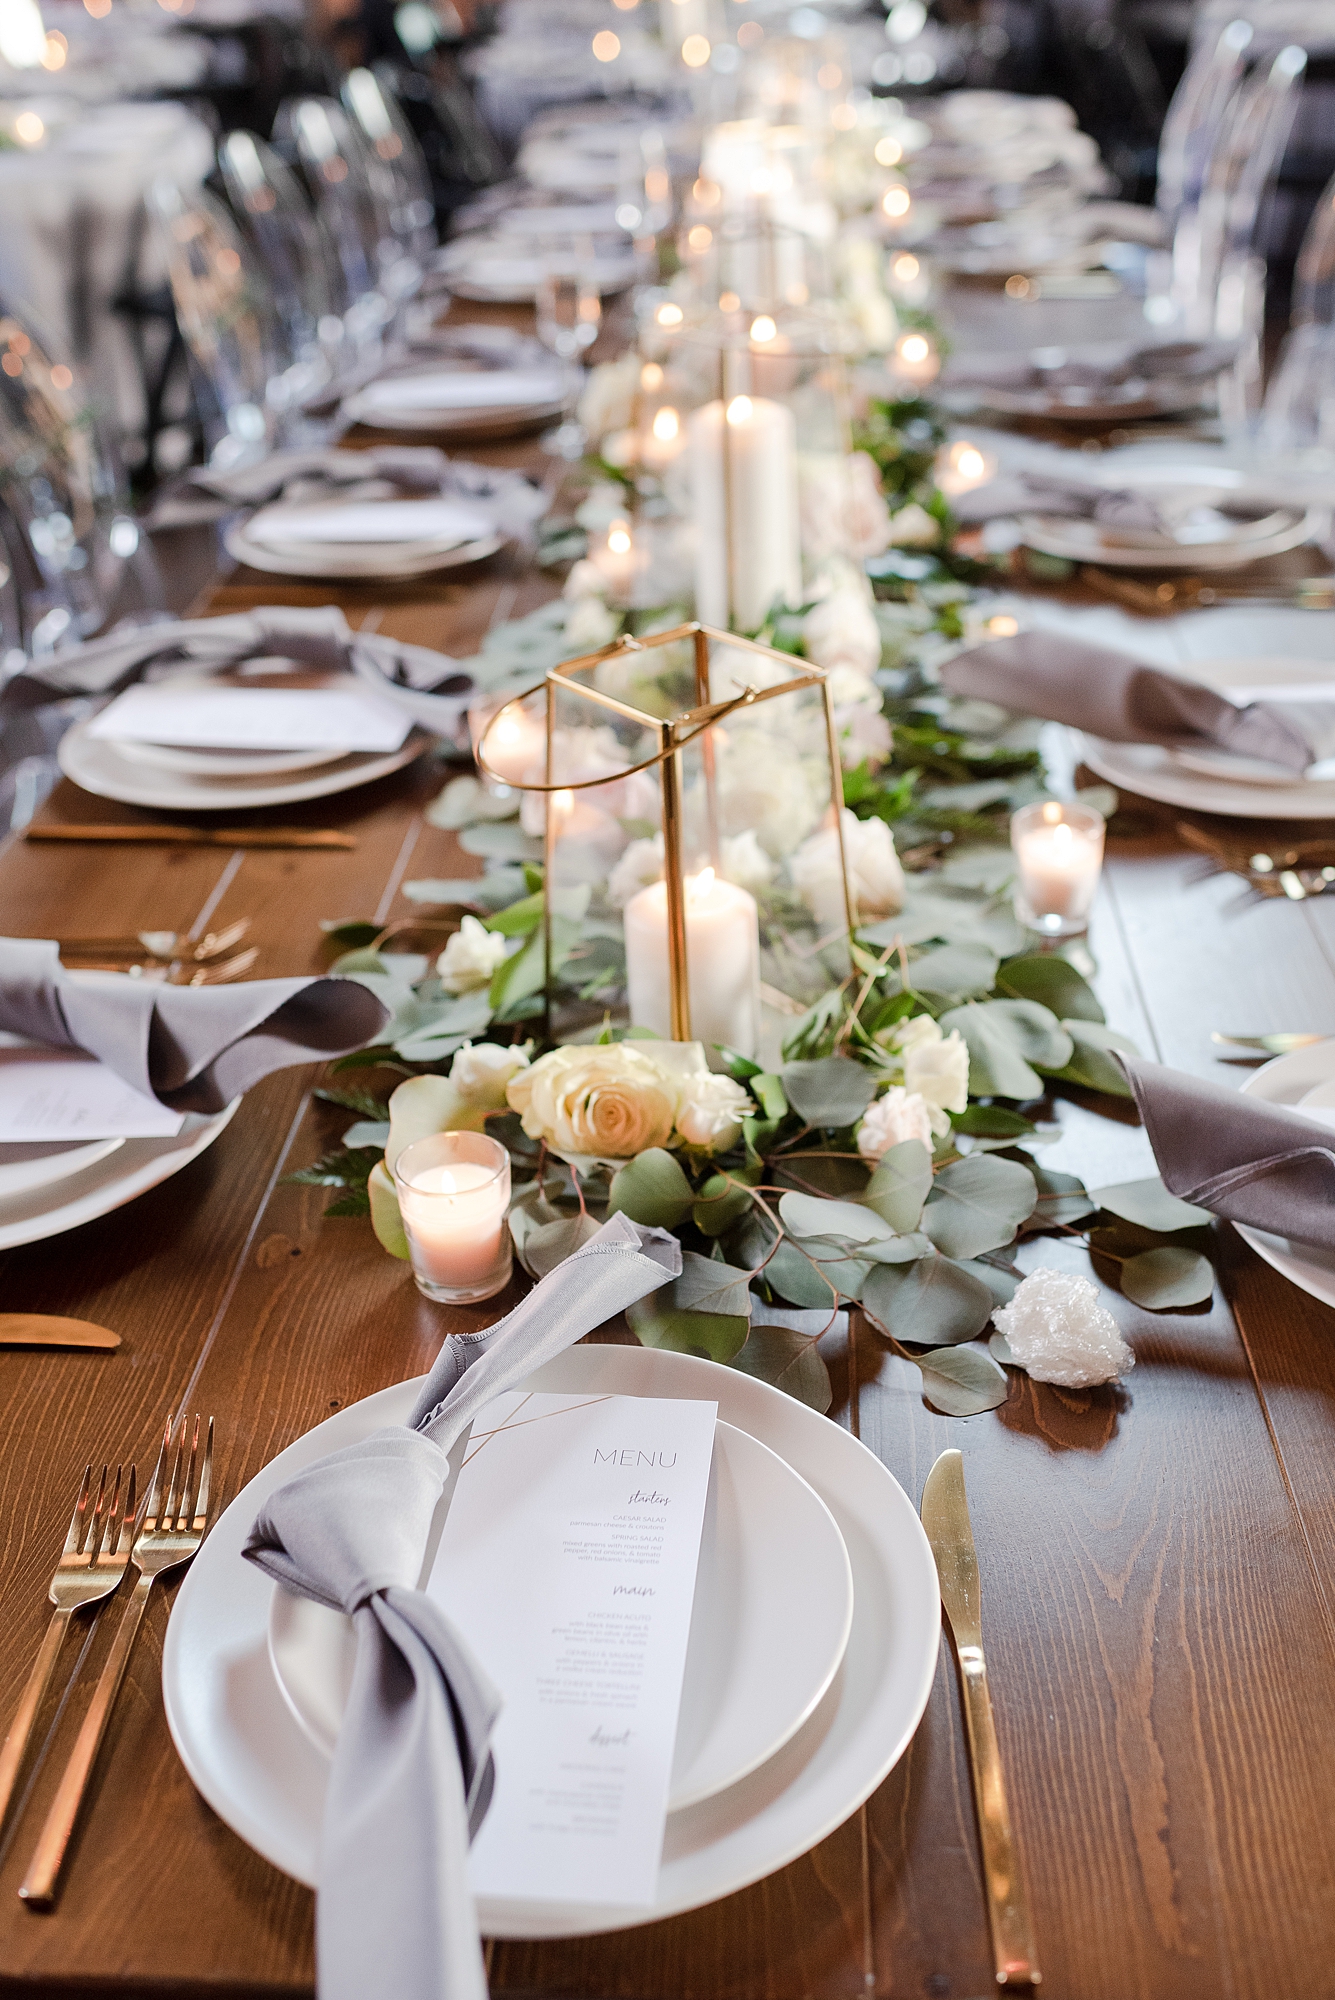 Reception Details At Clementine Nashville By Dolly DeLong Photography